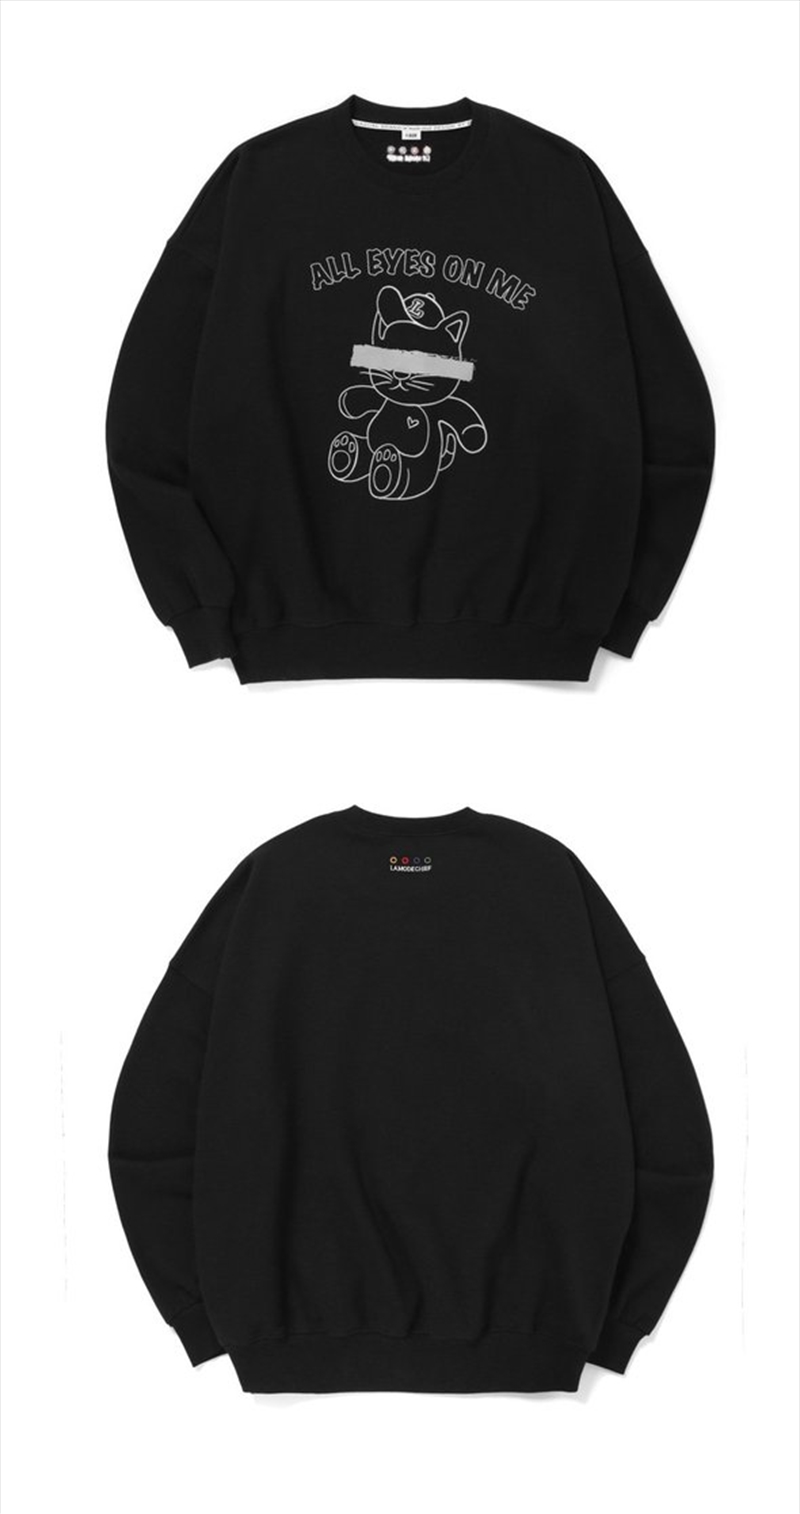 All Eyes On Me Black Sweatshirt Size M/L - Jungkook/Product Detail/Outerwear